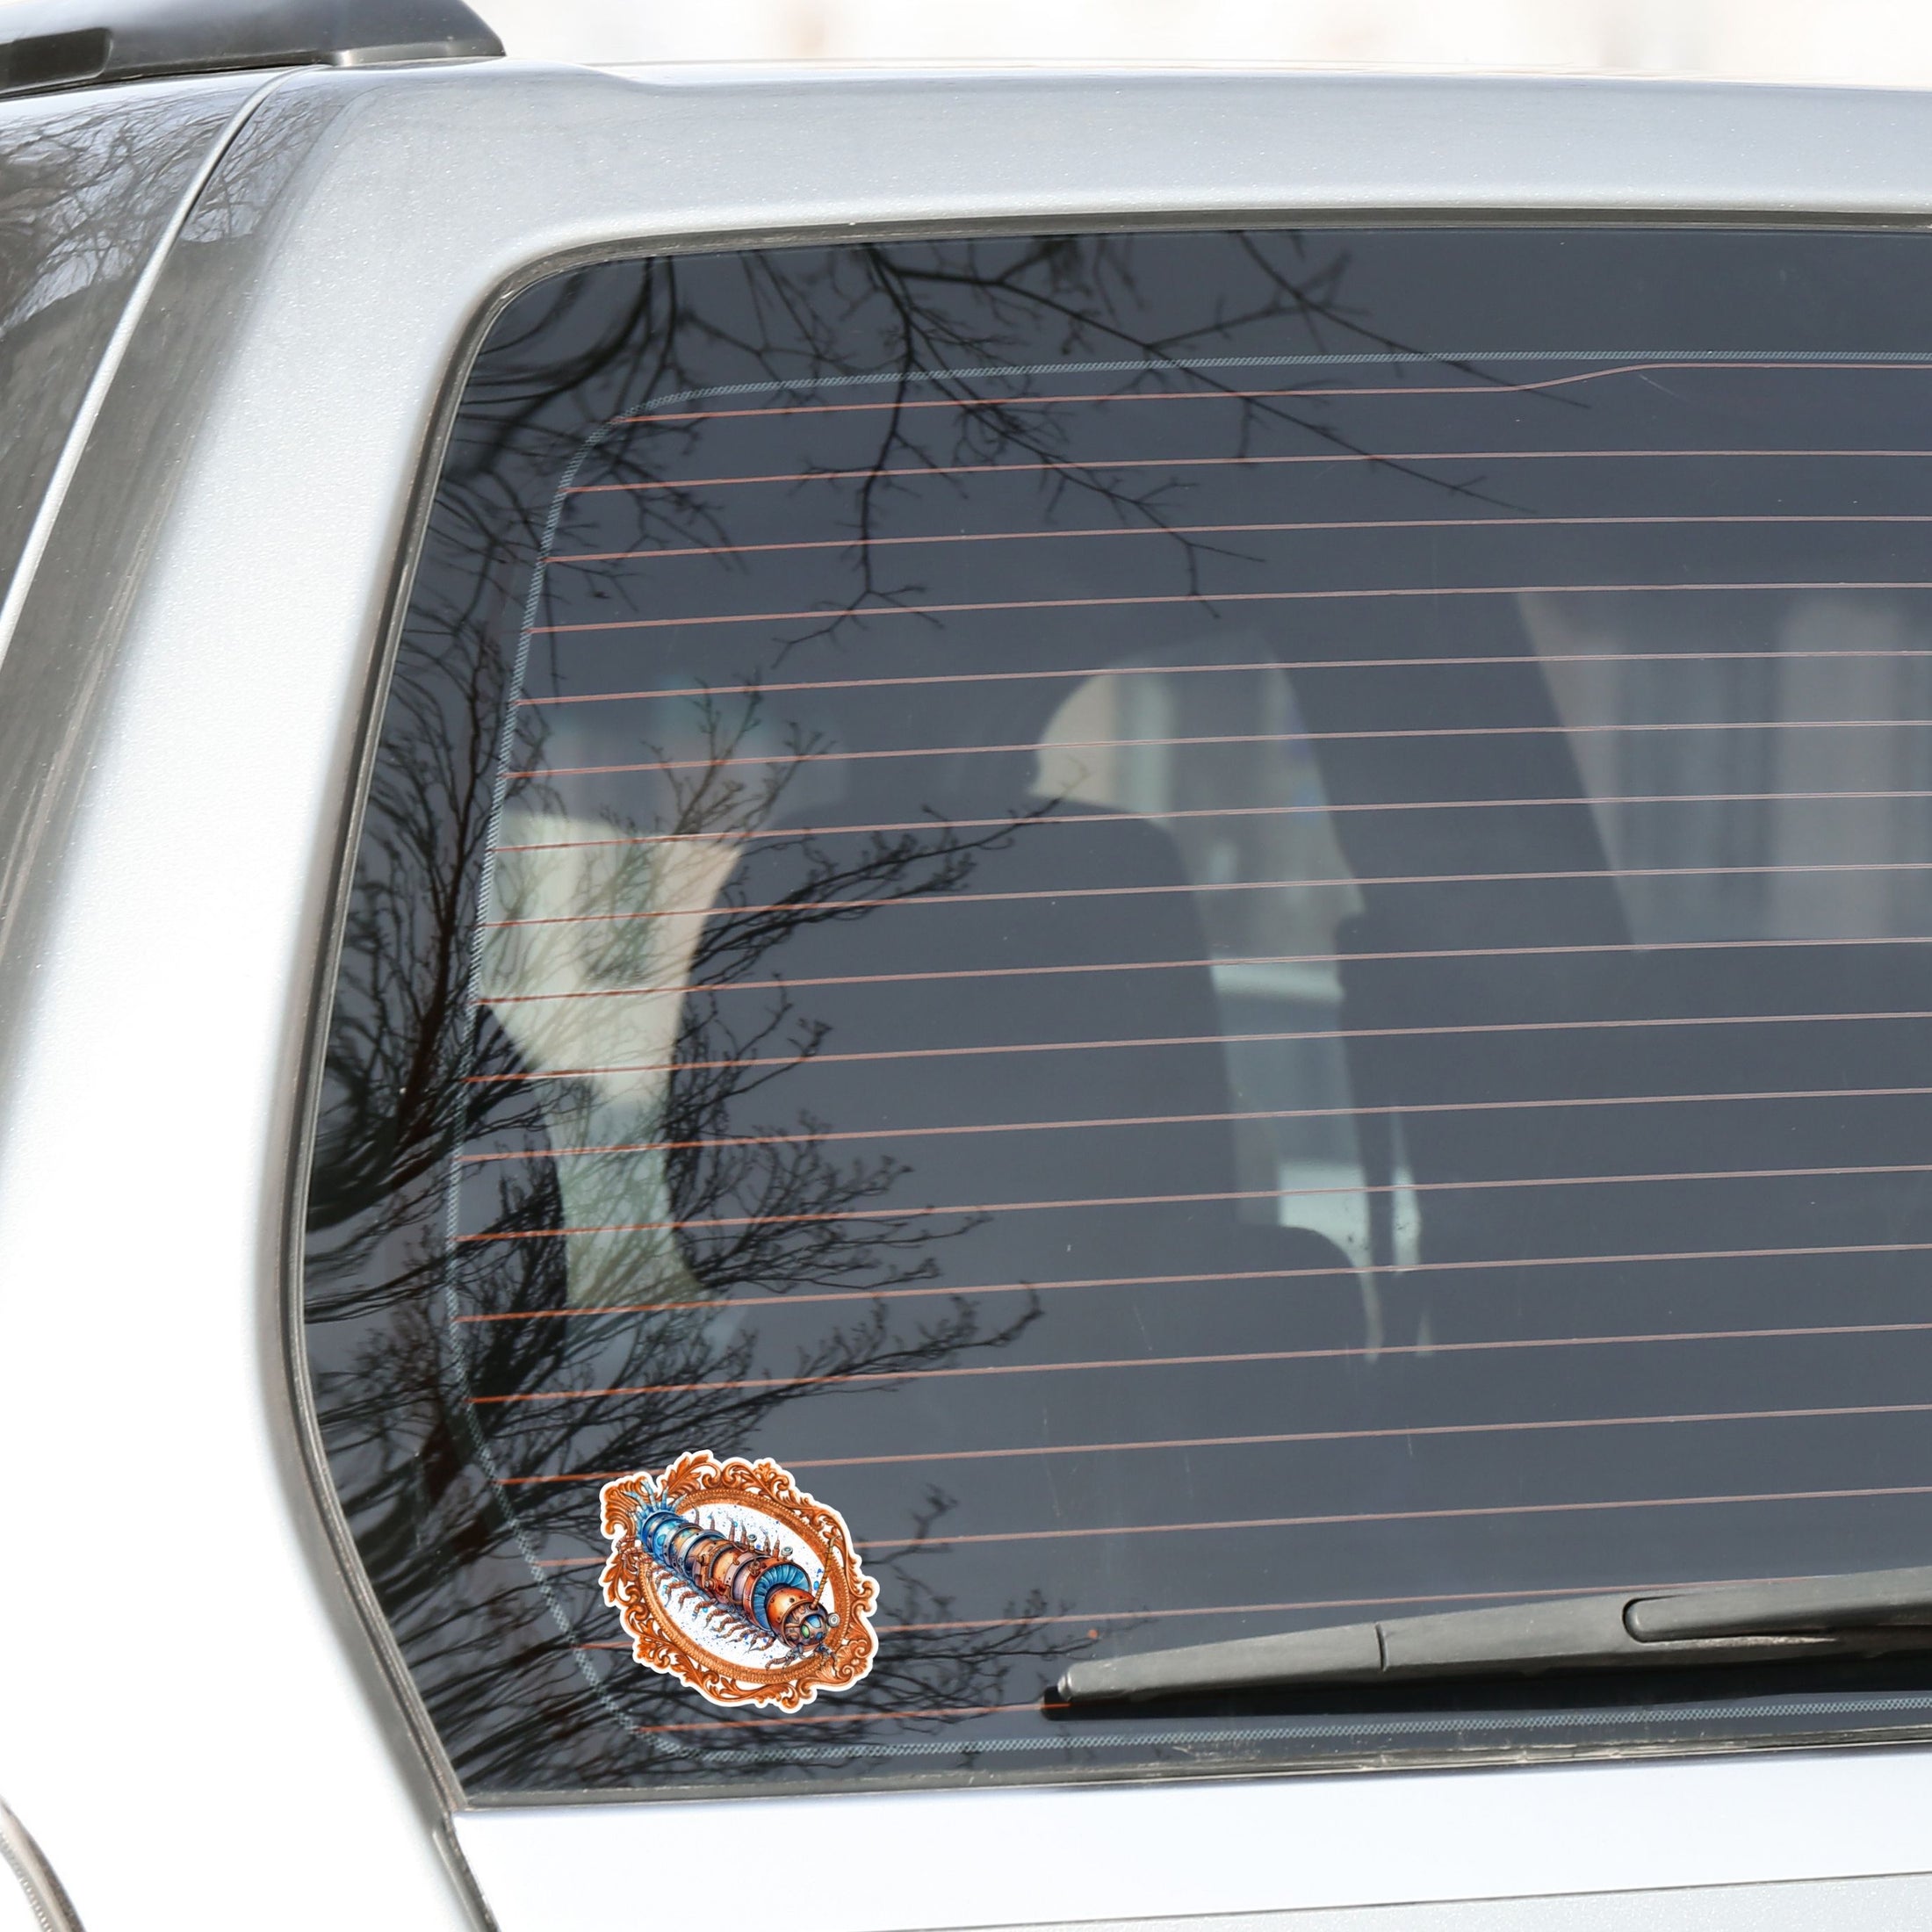 This image shows the steampunk centipede sticker on the back window of a car.